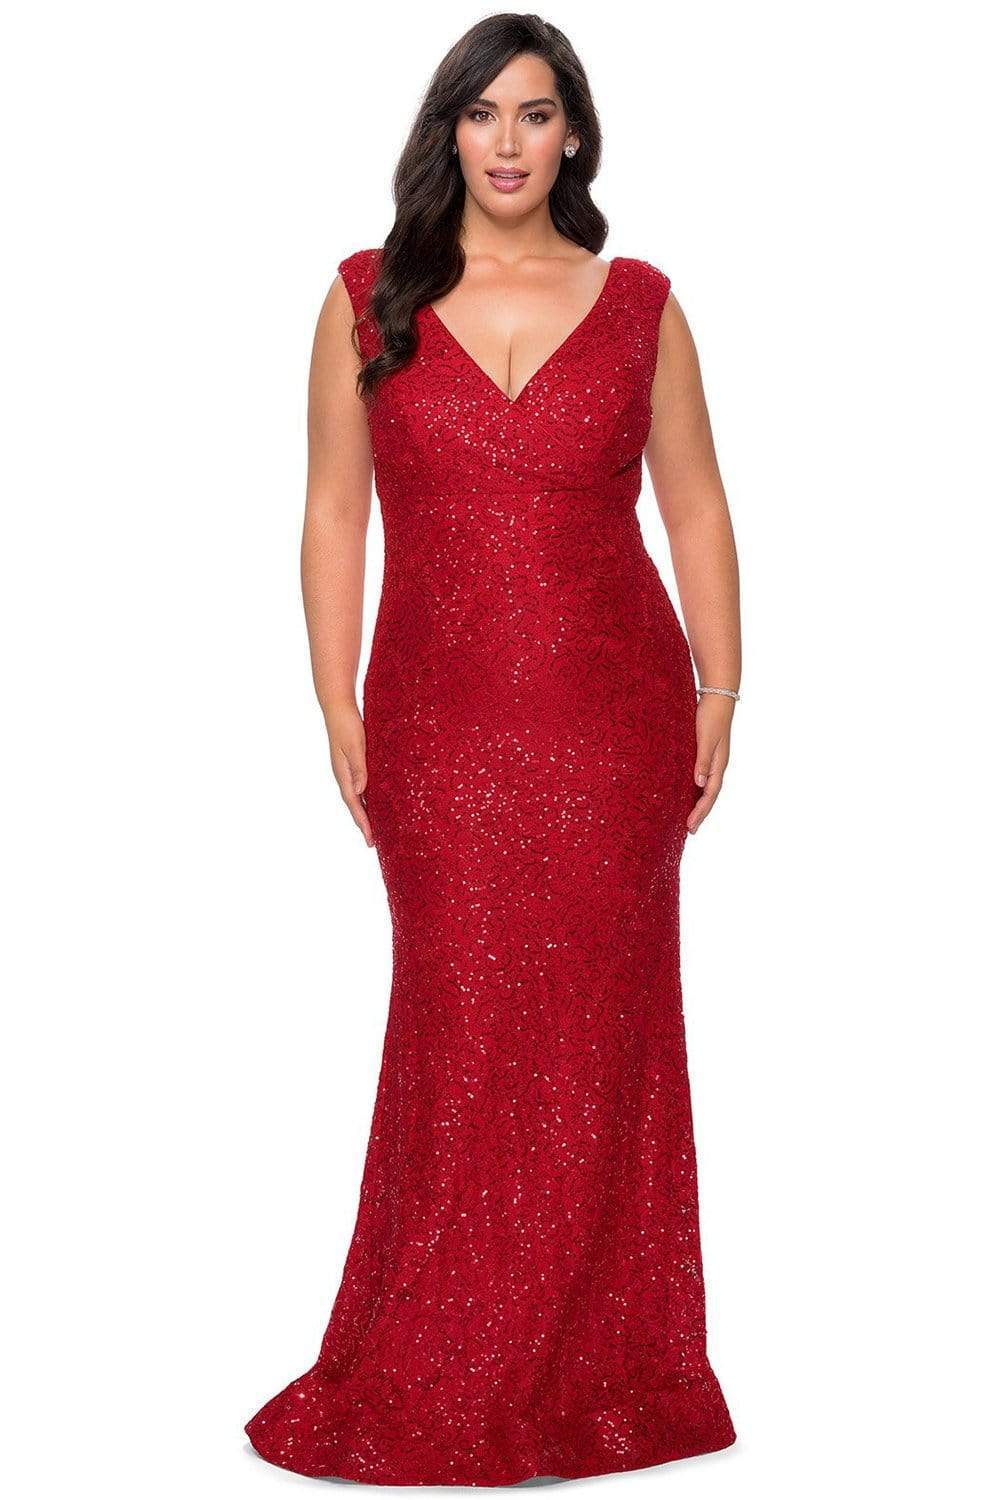 La Femme - 28837 V Neck Rhinestone Beaded Full Lace Evening Gown Evening Dresses 12W / Red